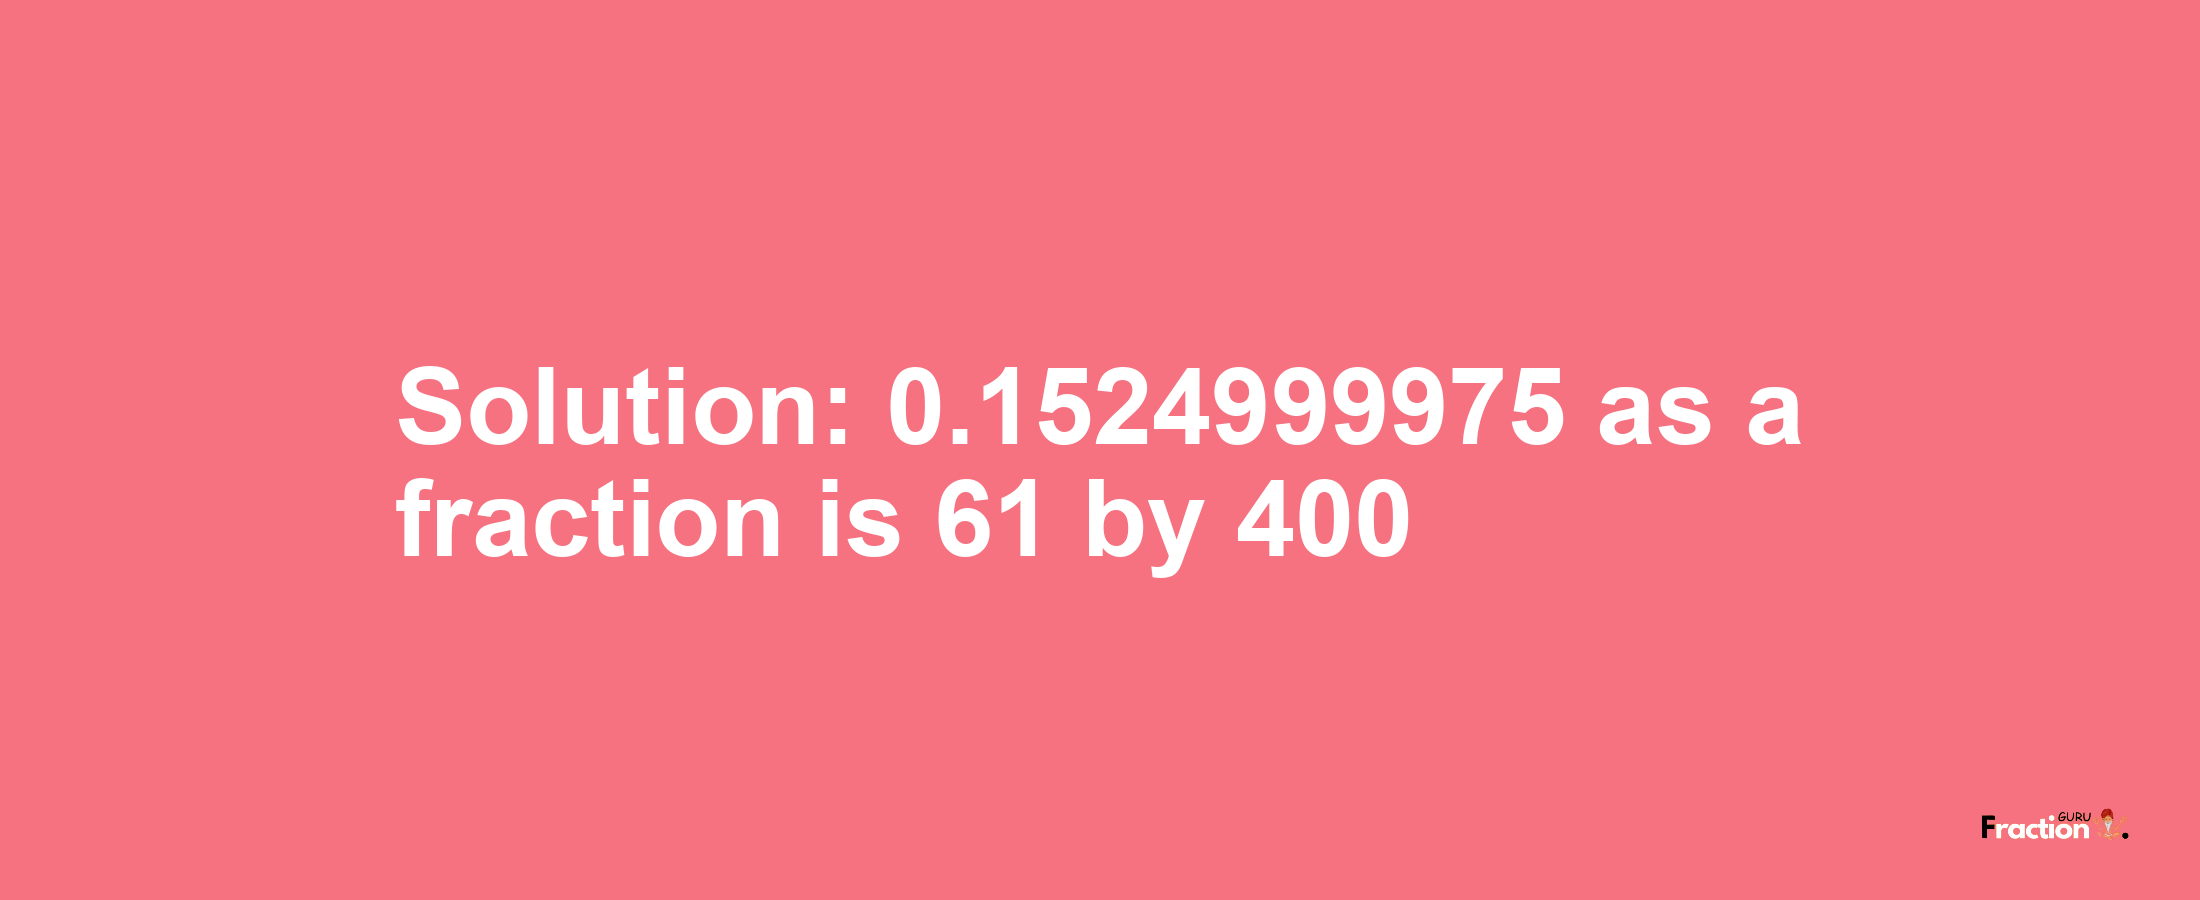 Solution:0.1524999975 as a fraction is 61/400